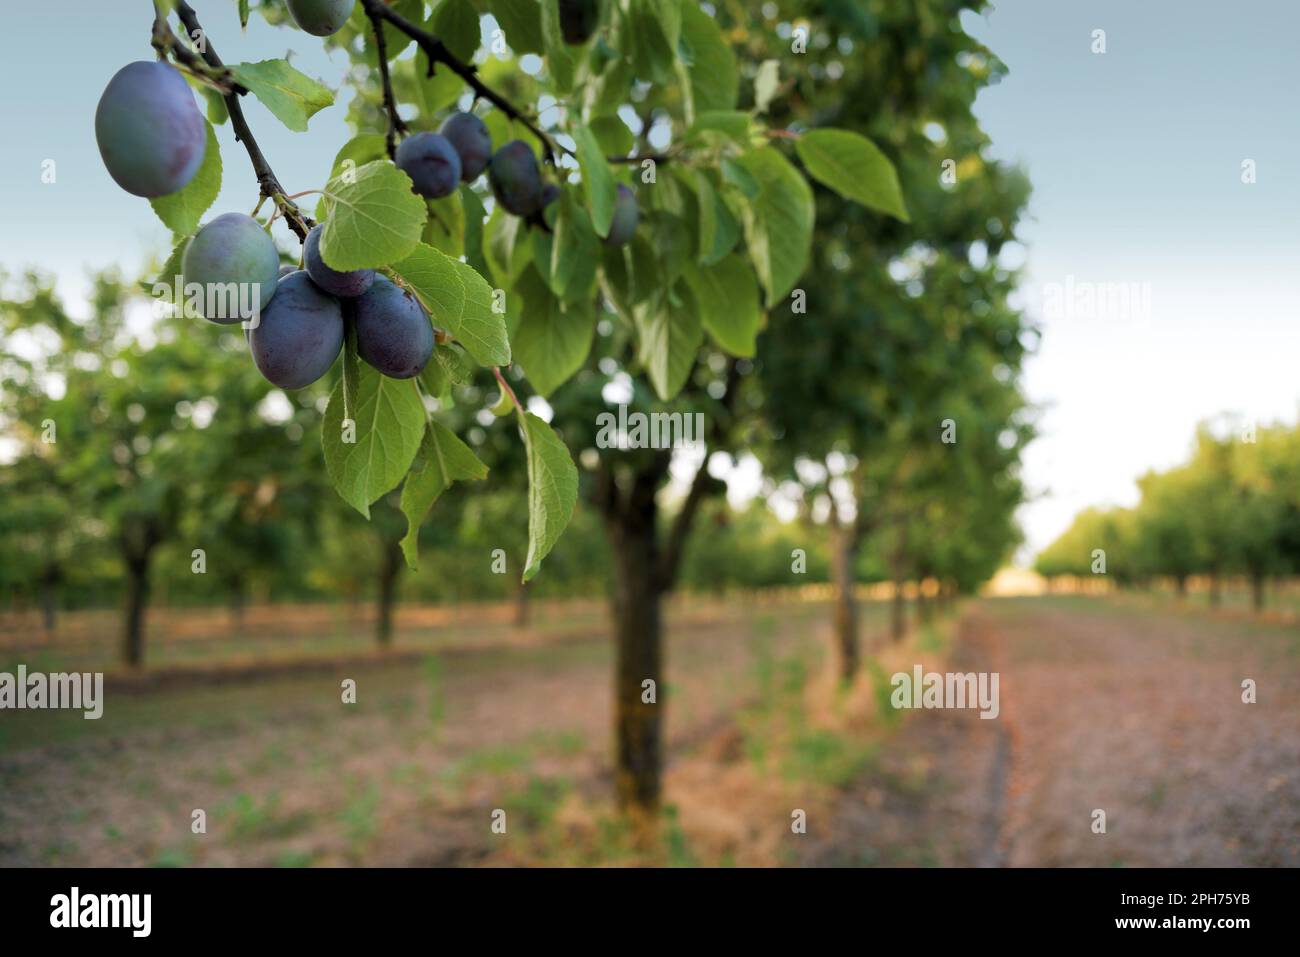 Plums on the tree Stock Photo